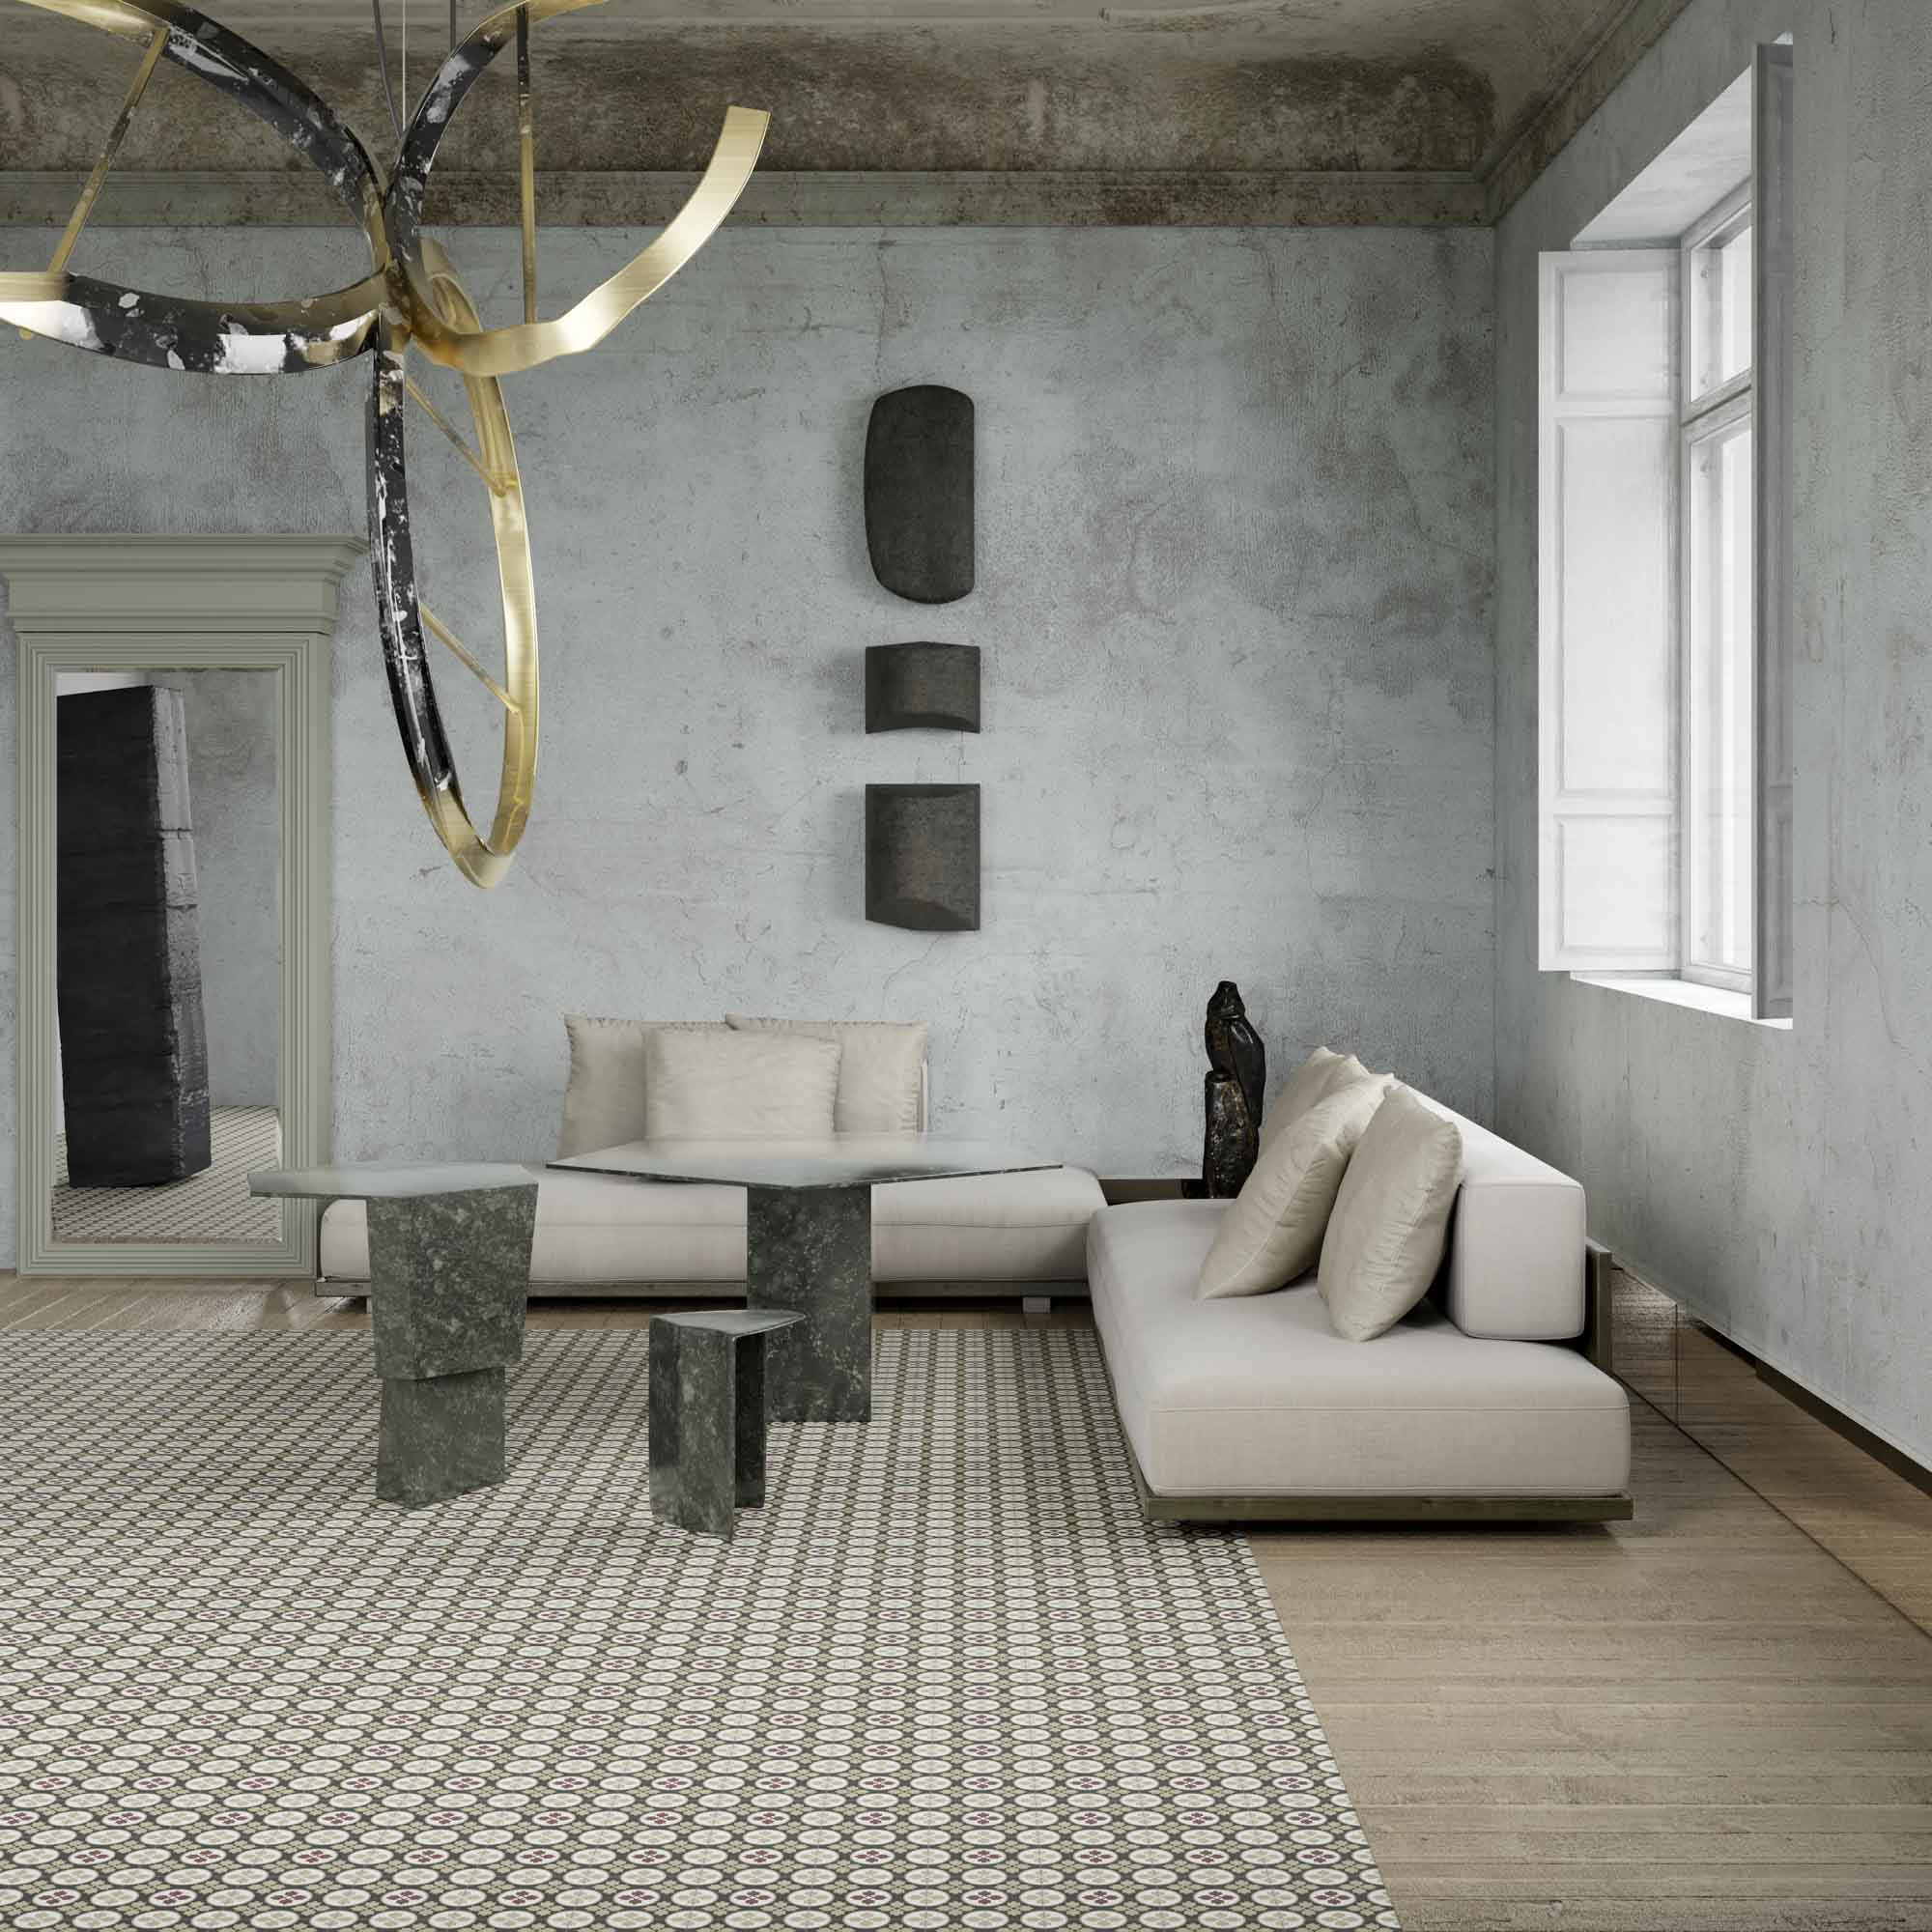 japandi style living room with encaustic tiles